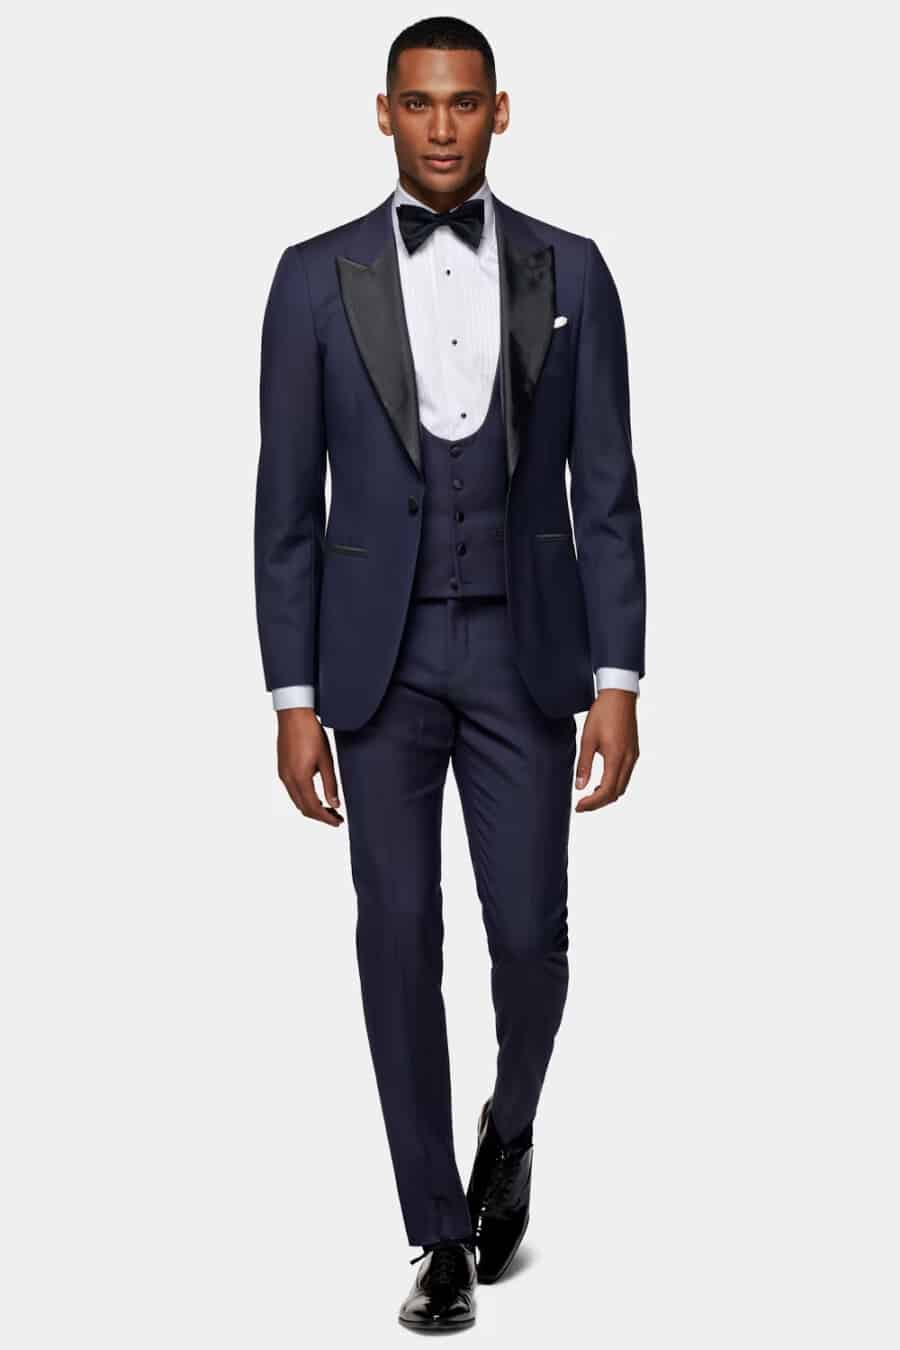 Men's Wedding Attire Guide: What To Wear (32 Outfits For 2024)